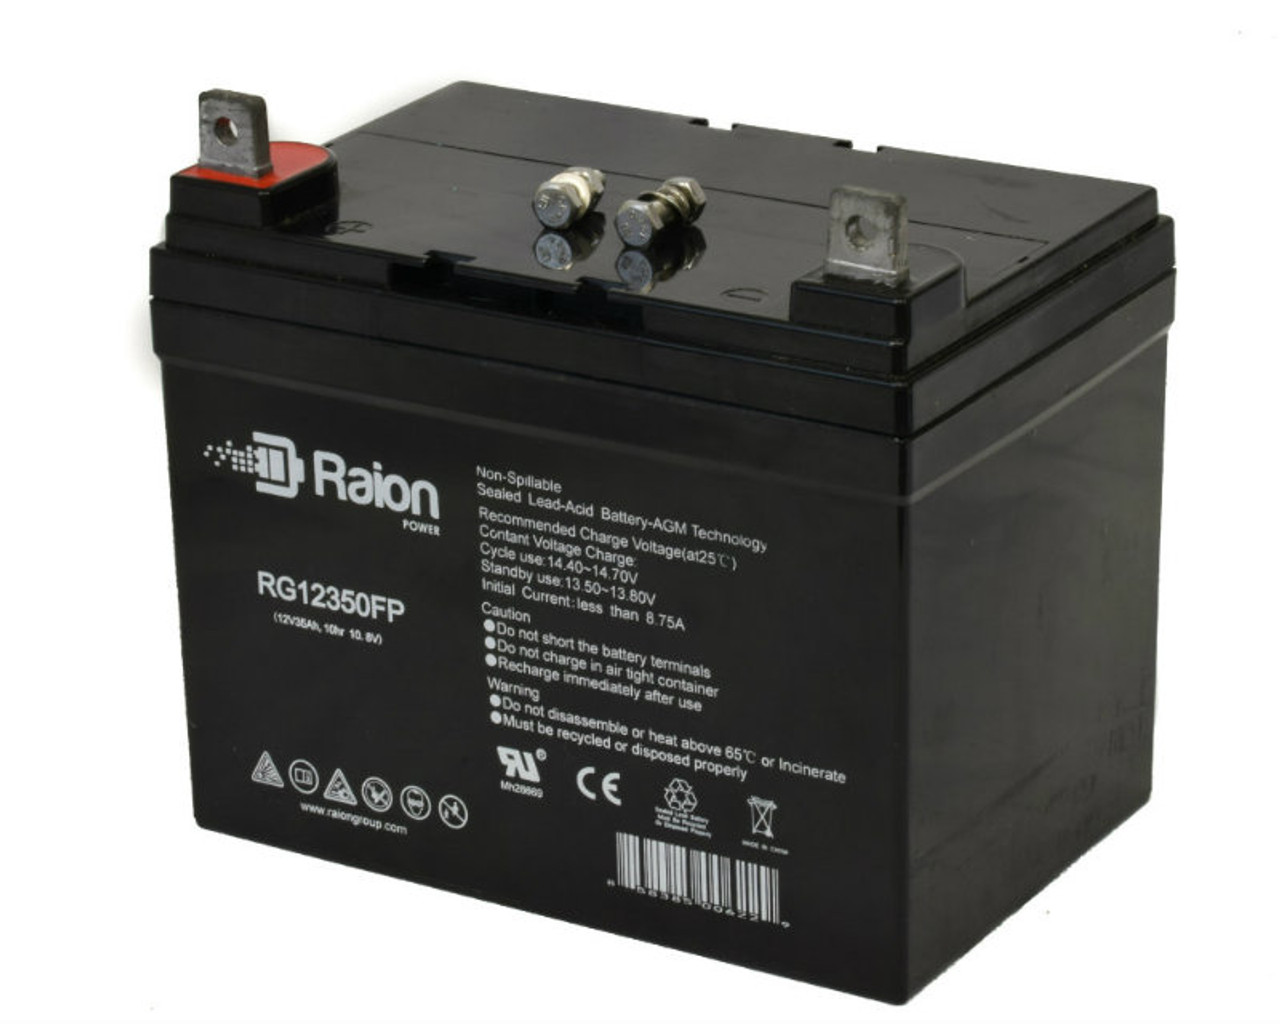 Raion Power Replacement 12V 35Ah RG12350FP Battery for Speedex Tractor 1240M